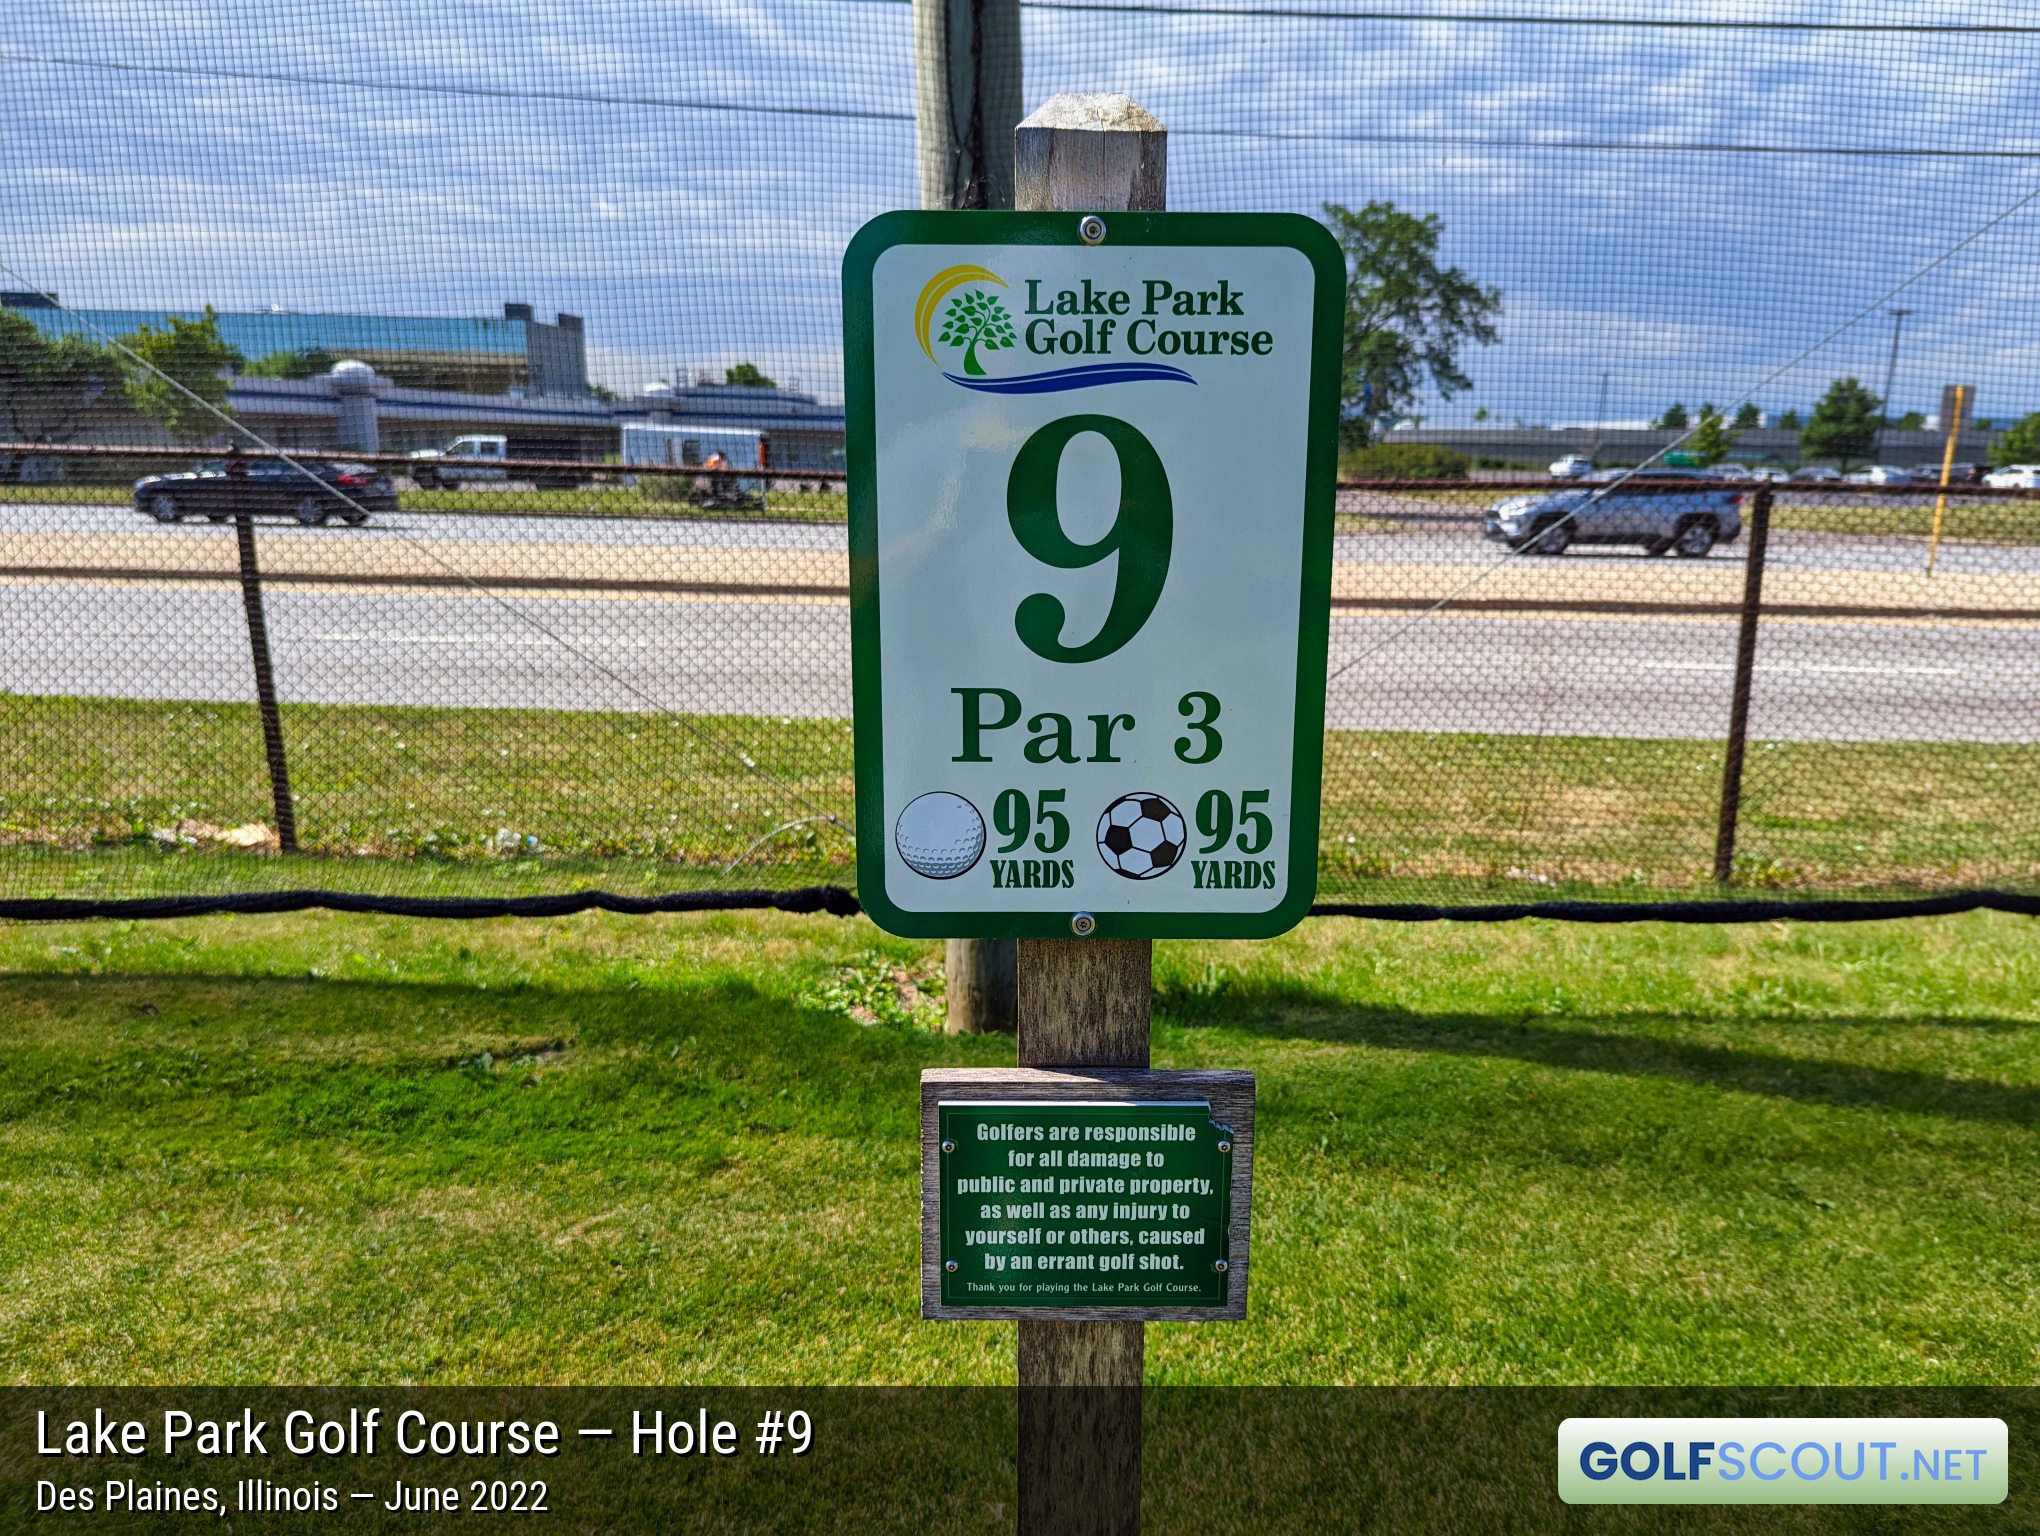 Photo of hole #9 at Lake Park Golf Course in Des Plaines, Illinois. 